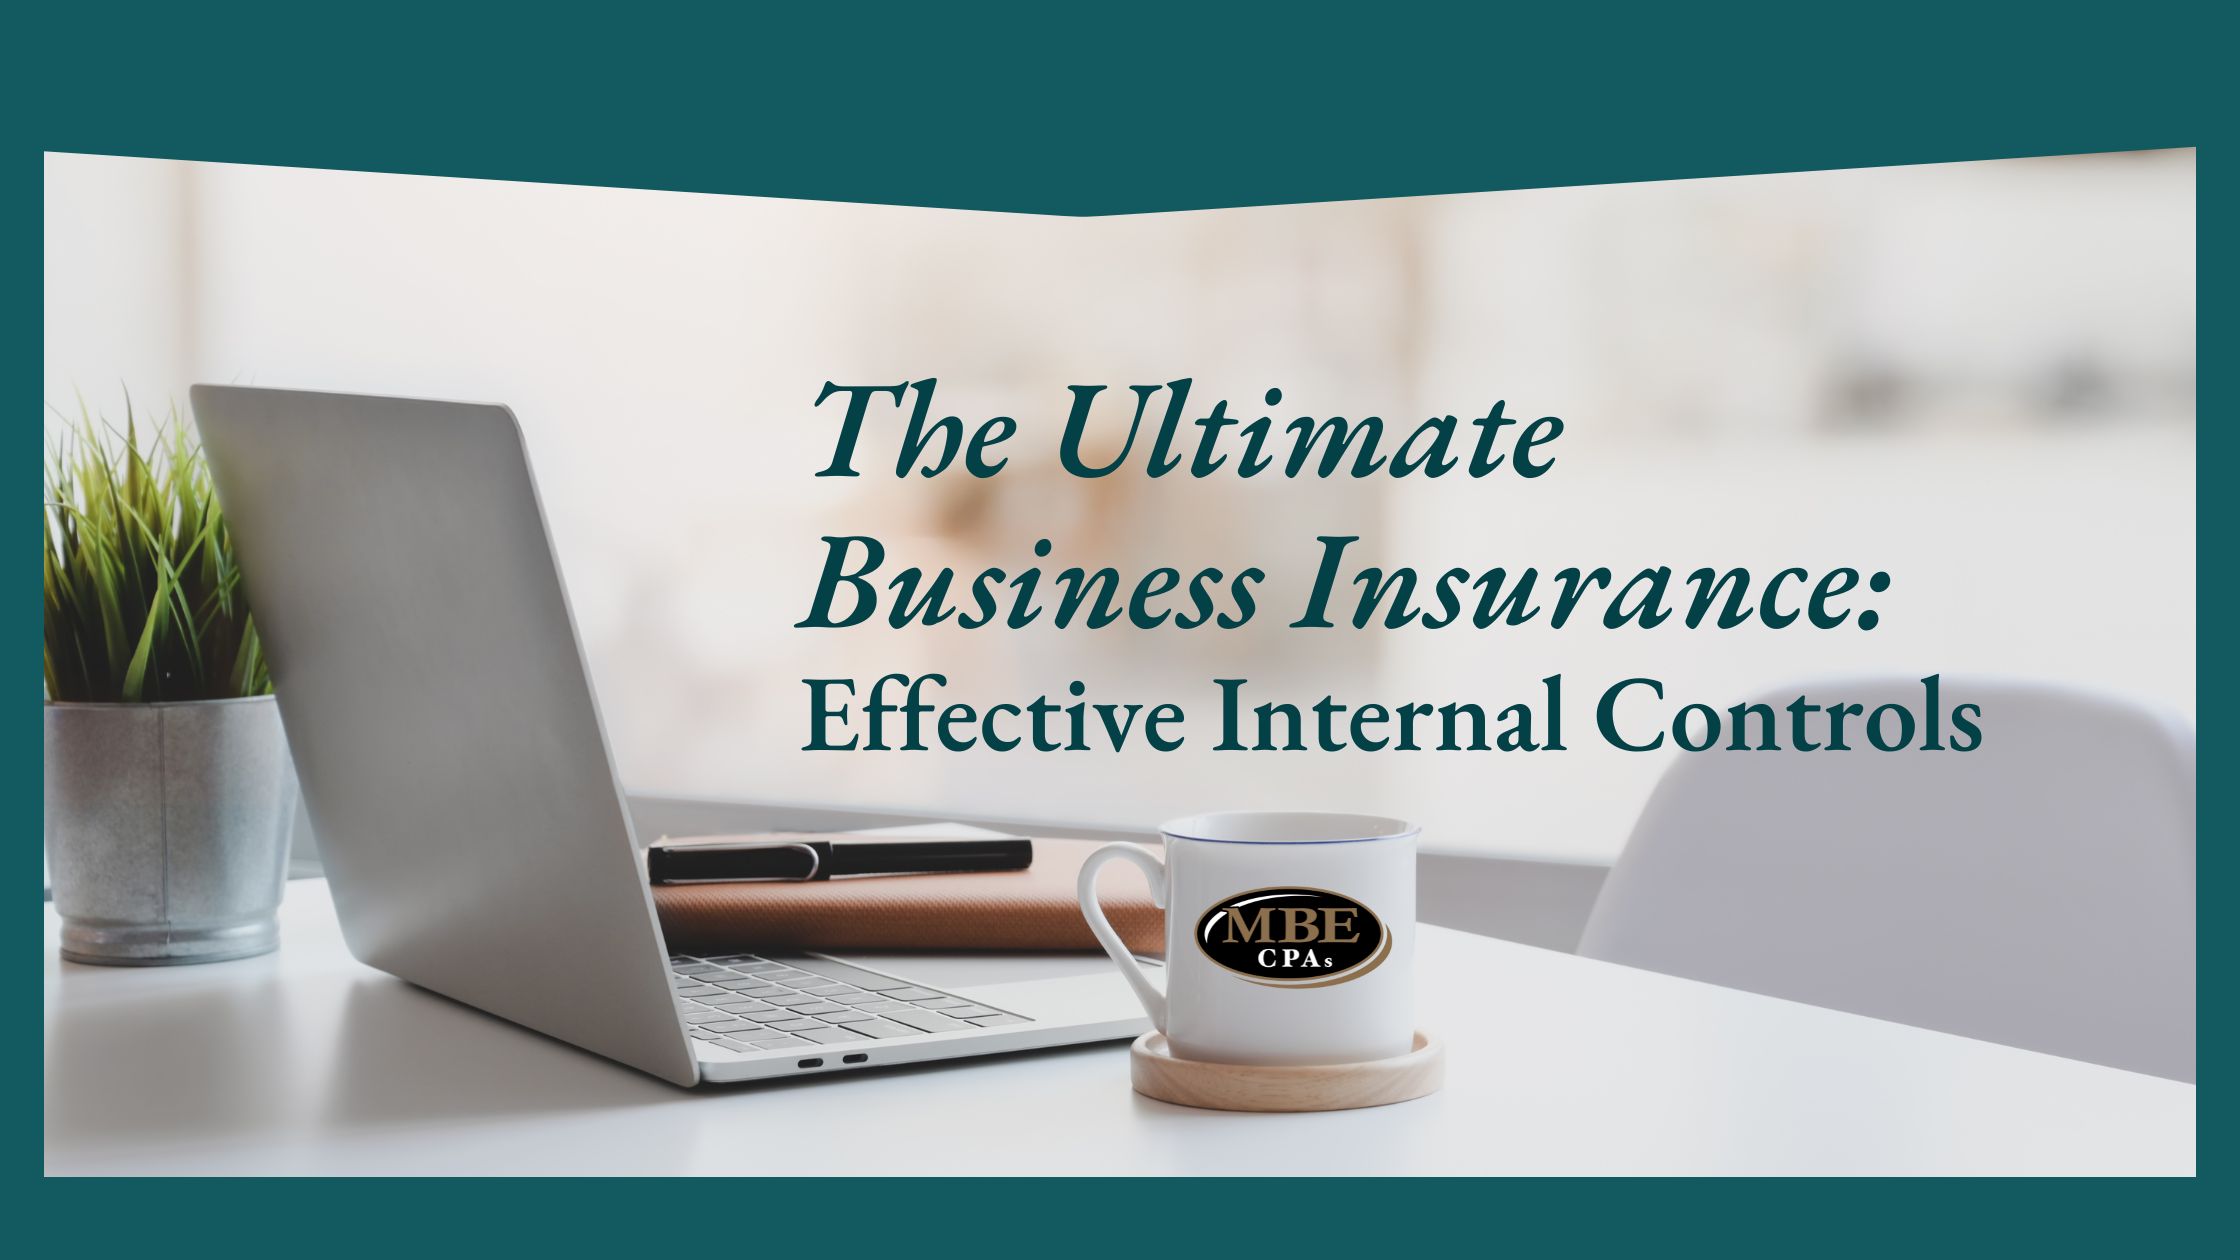 The Ultimate Business Insurance Effective Internal Controls